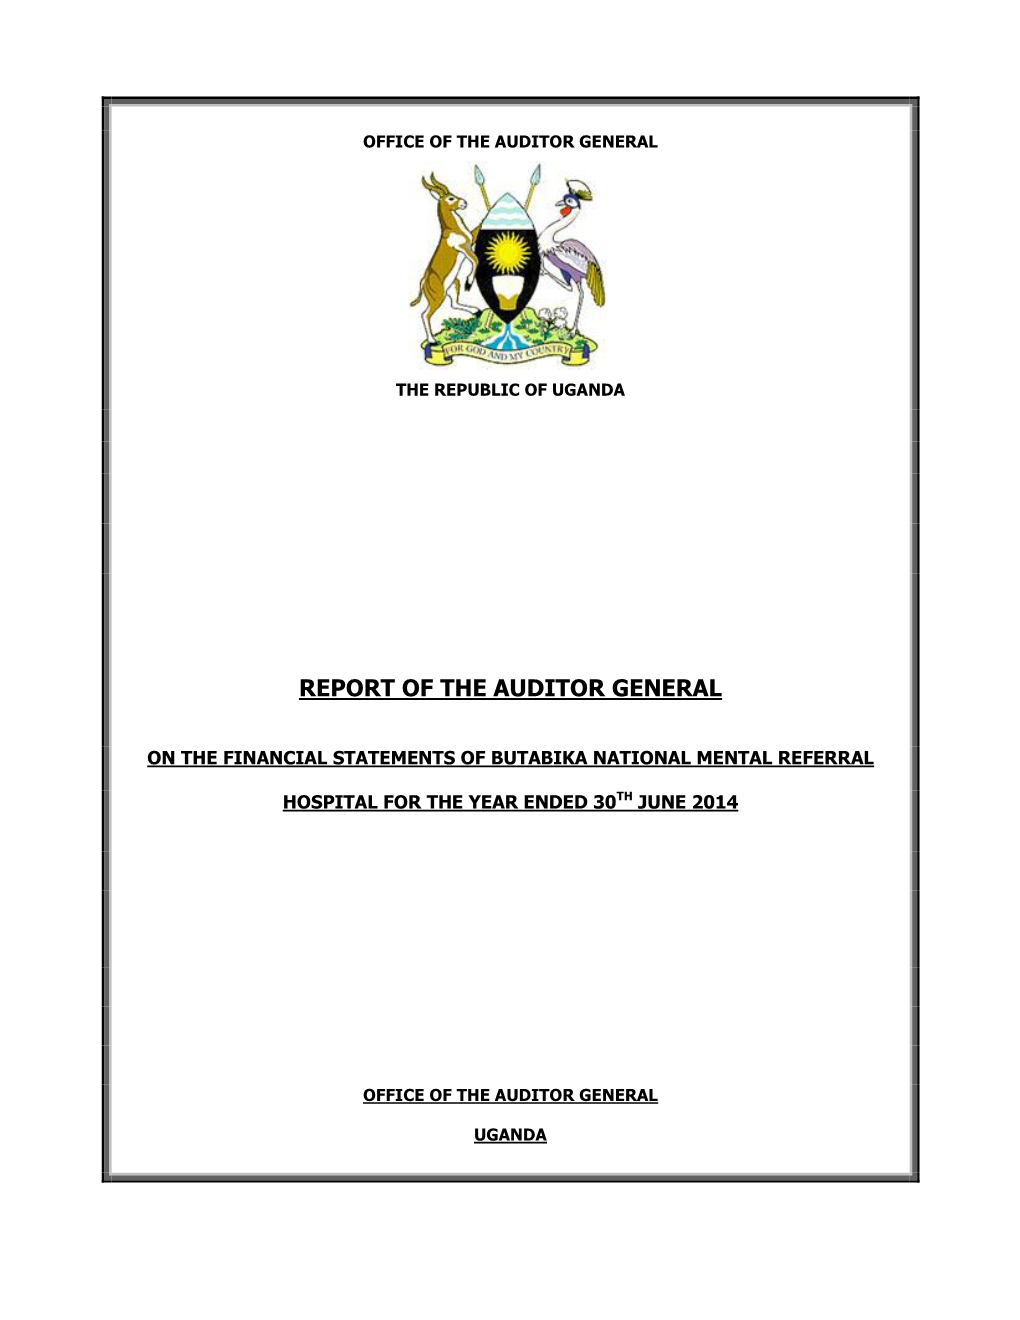 Report of the Auditor General